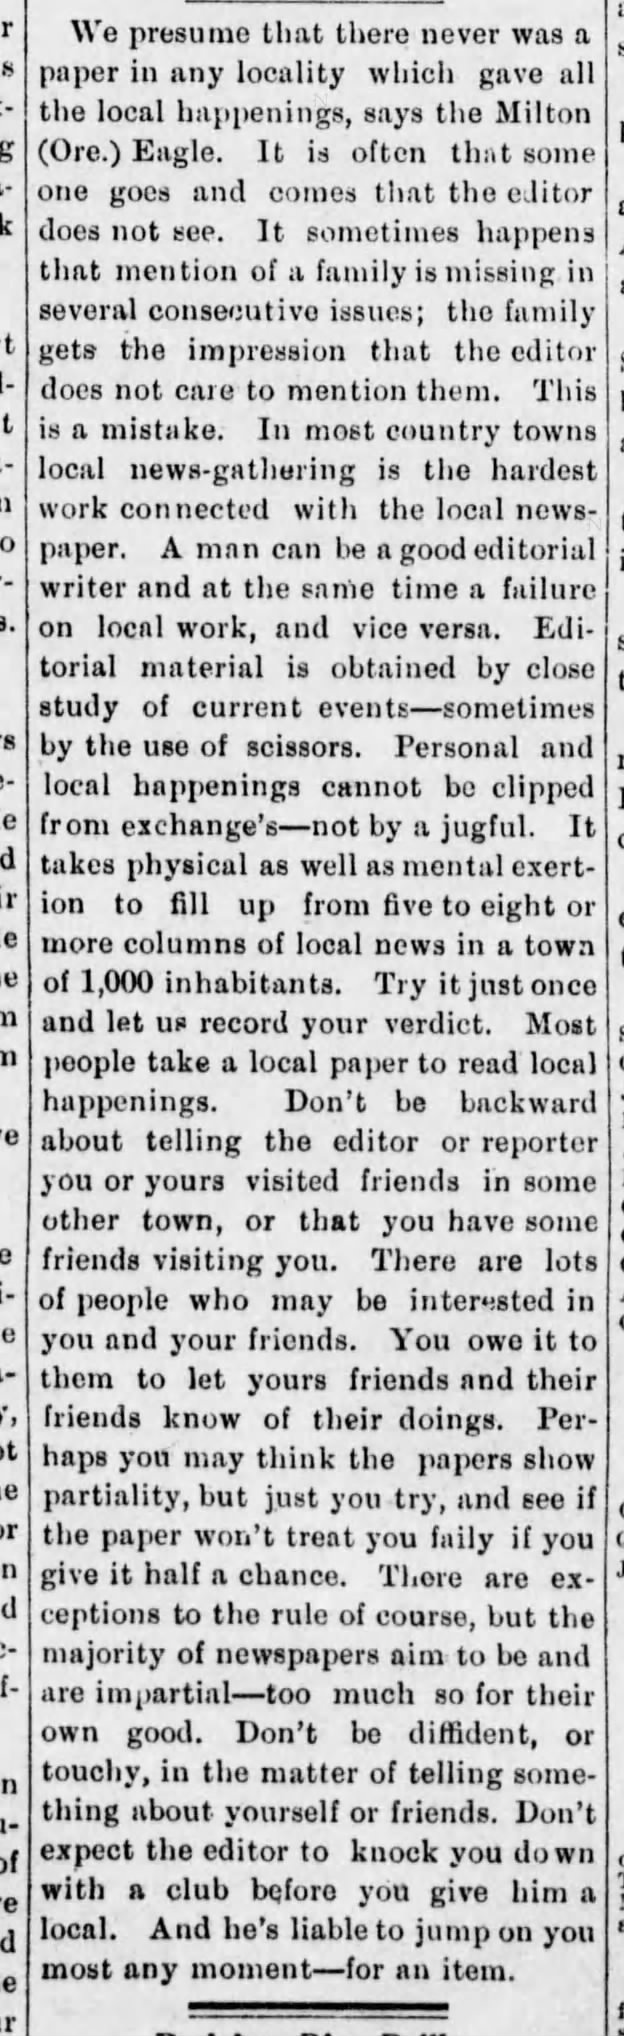 Report your social news to the newspaper, 1899